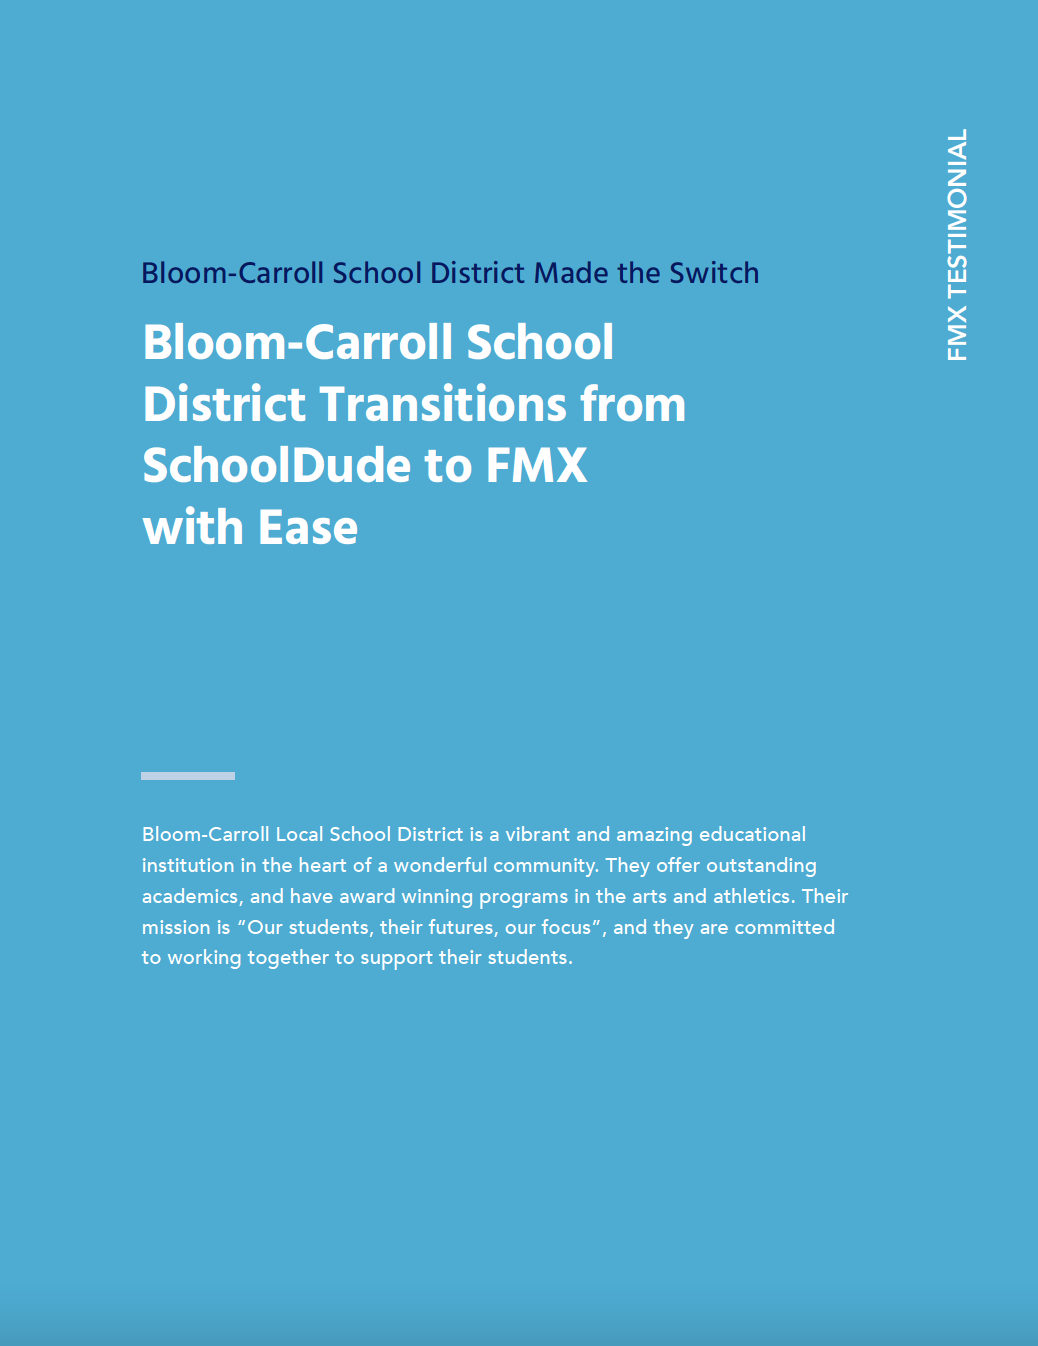 Bloom-Carroll School District Switches from SchoolDude to FMX